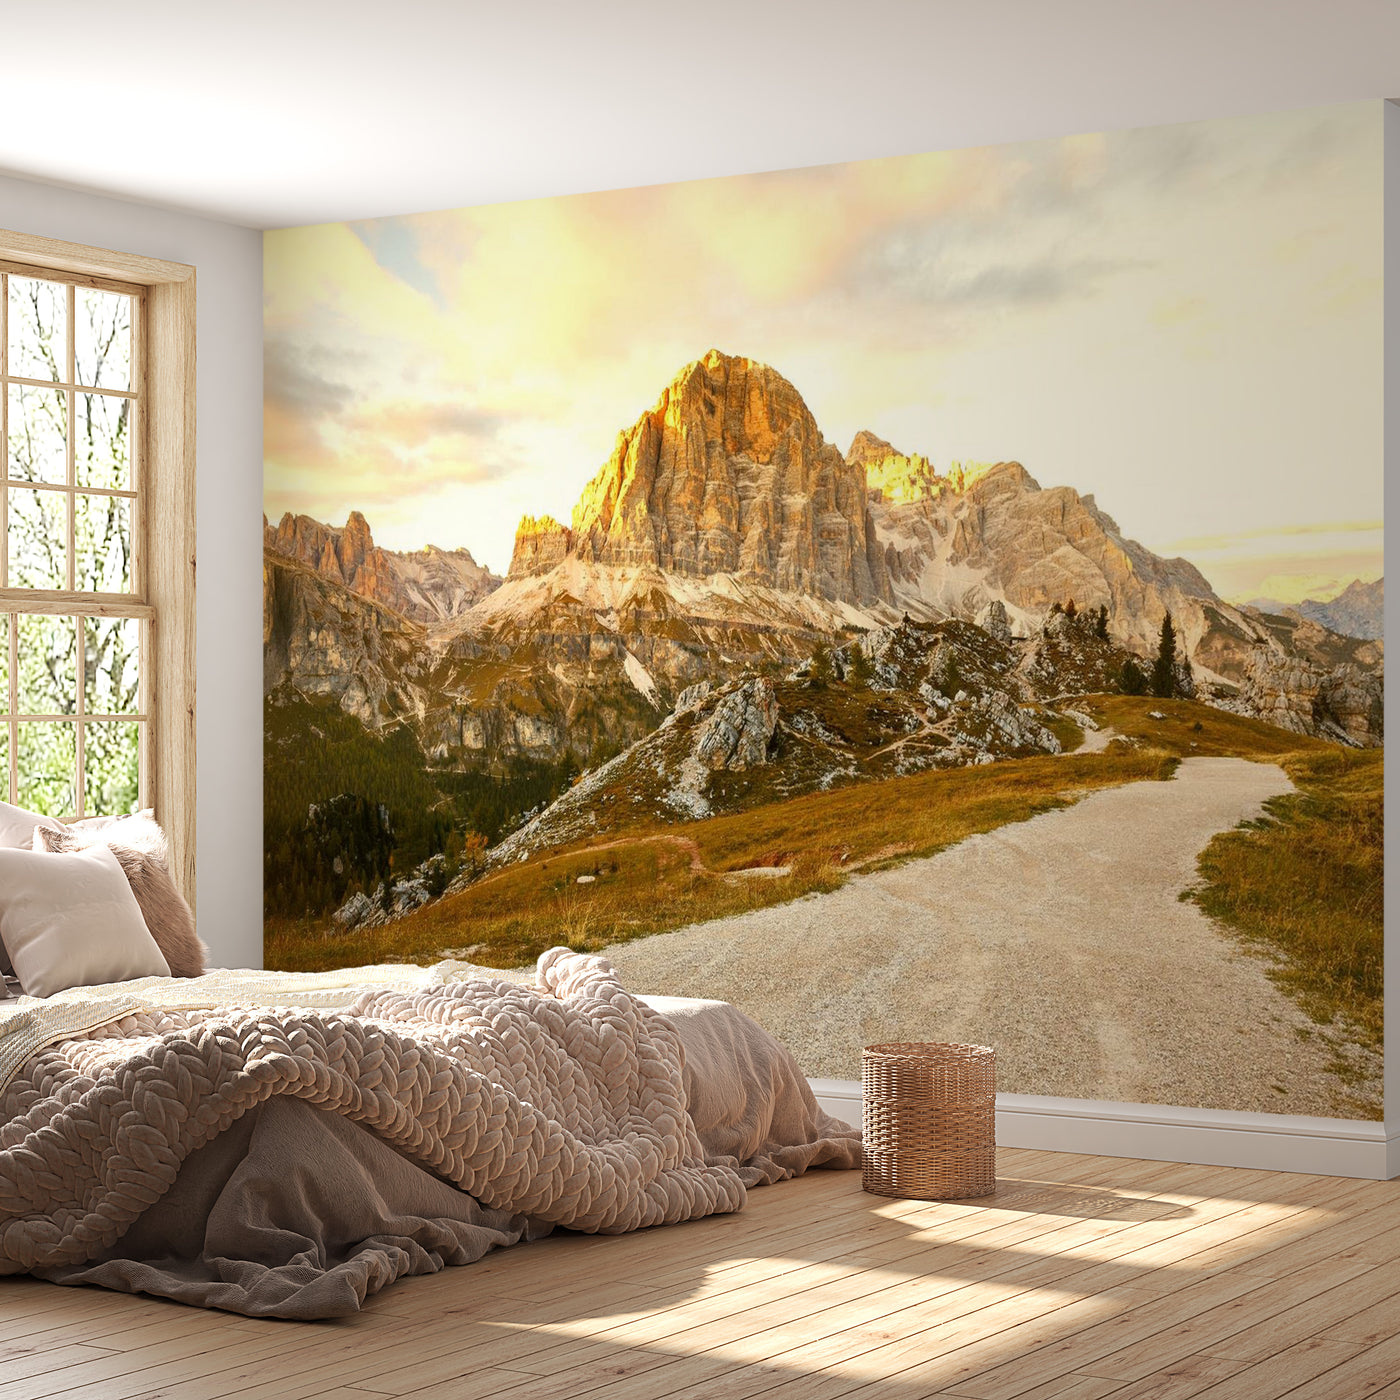 Peel & Stick Nature Wall Mural - Beautiful Dolomites - Removable Wall Decals